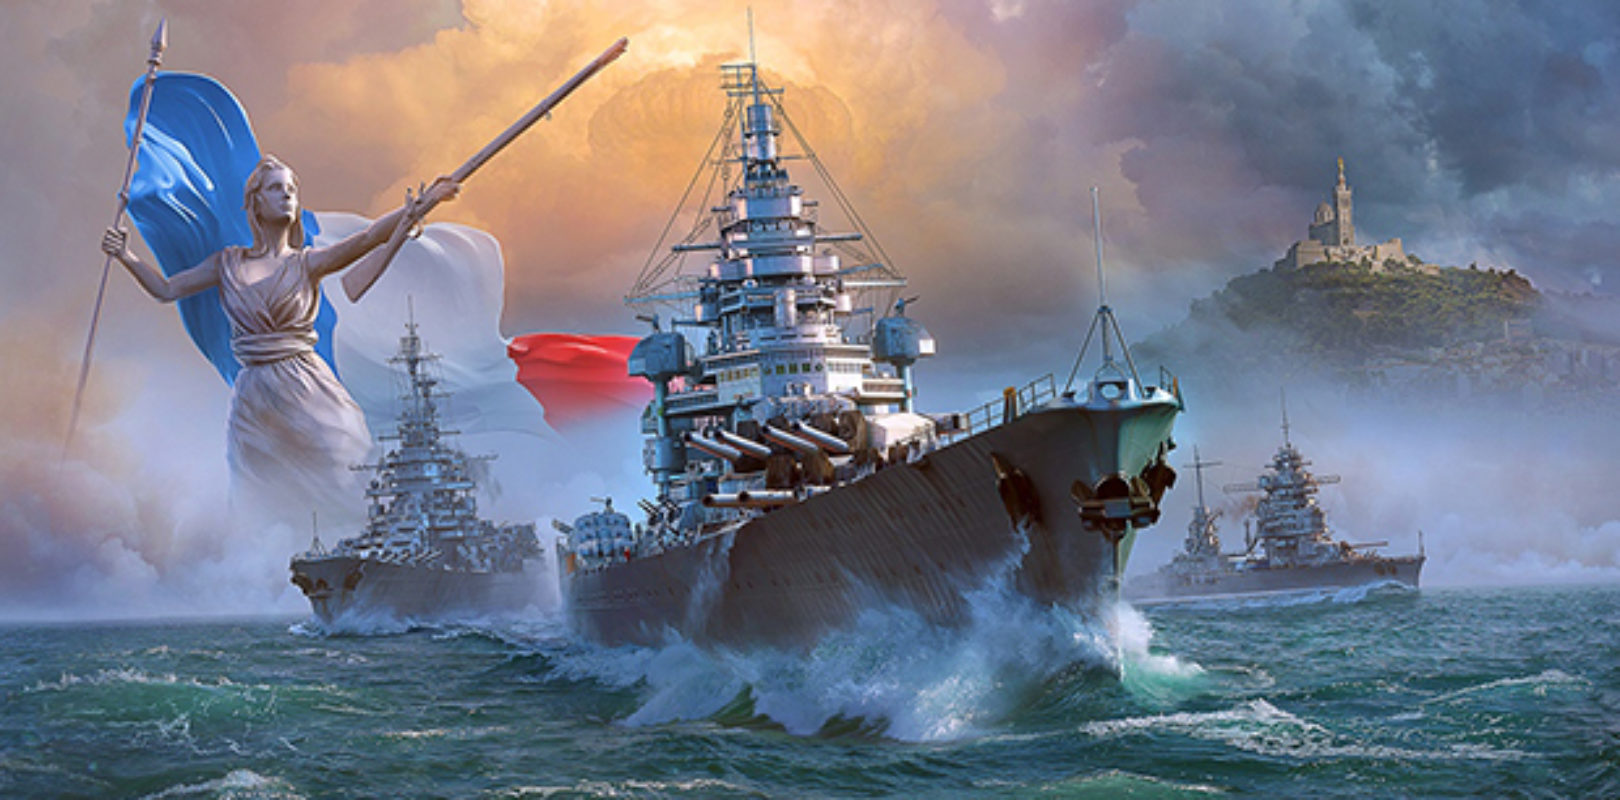 how to redeem code on world of warships